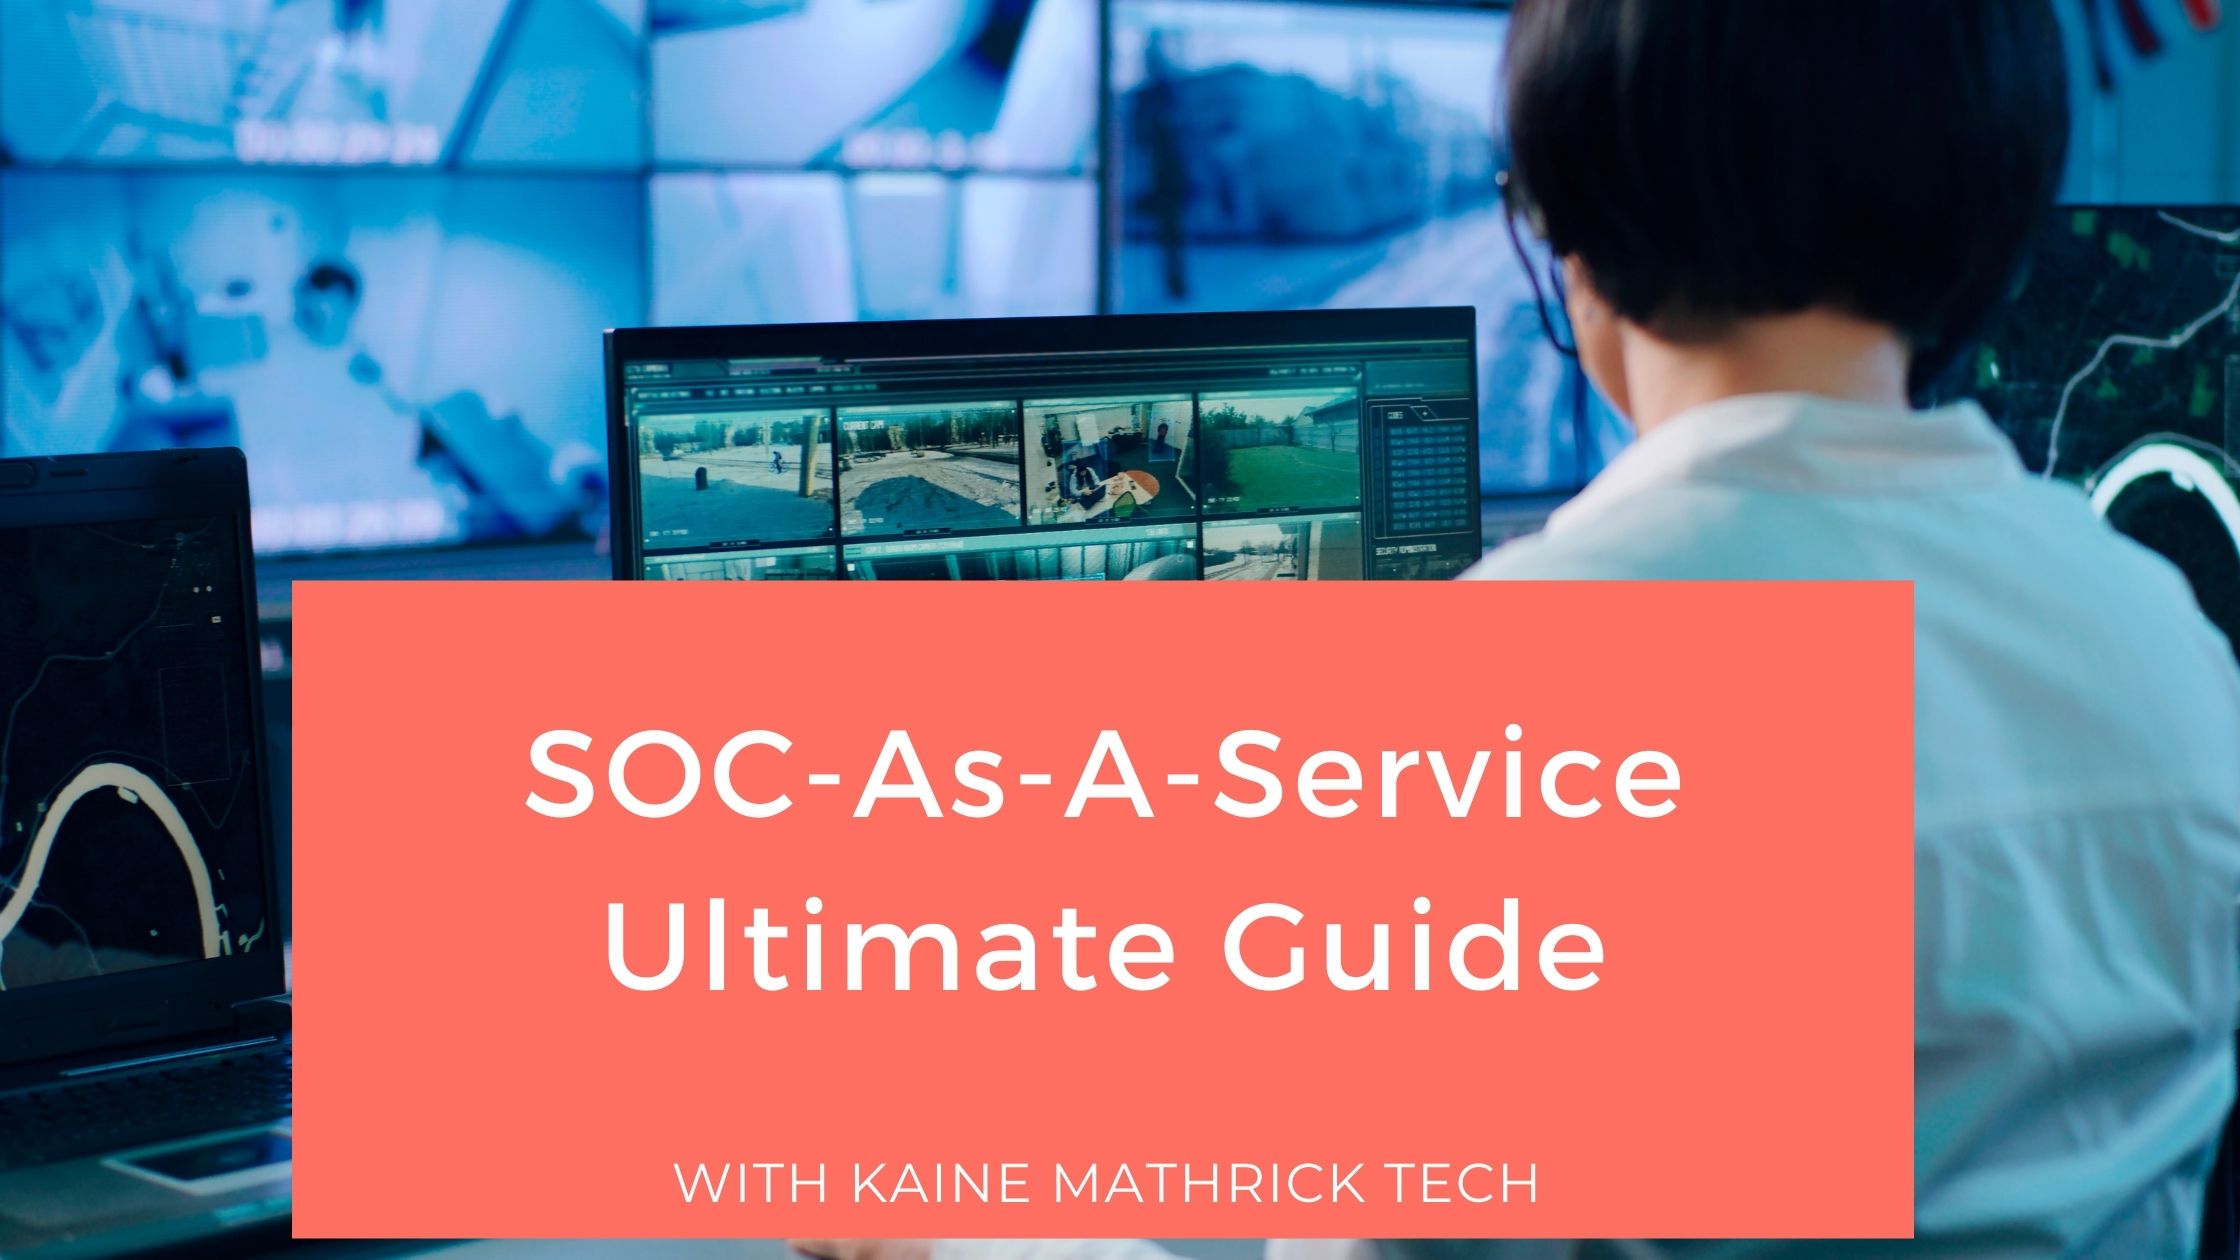 SOC-As-A-Service Ultimate Guide